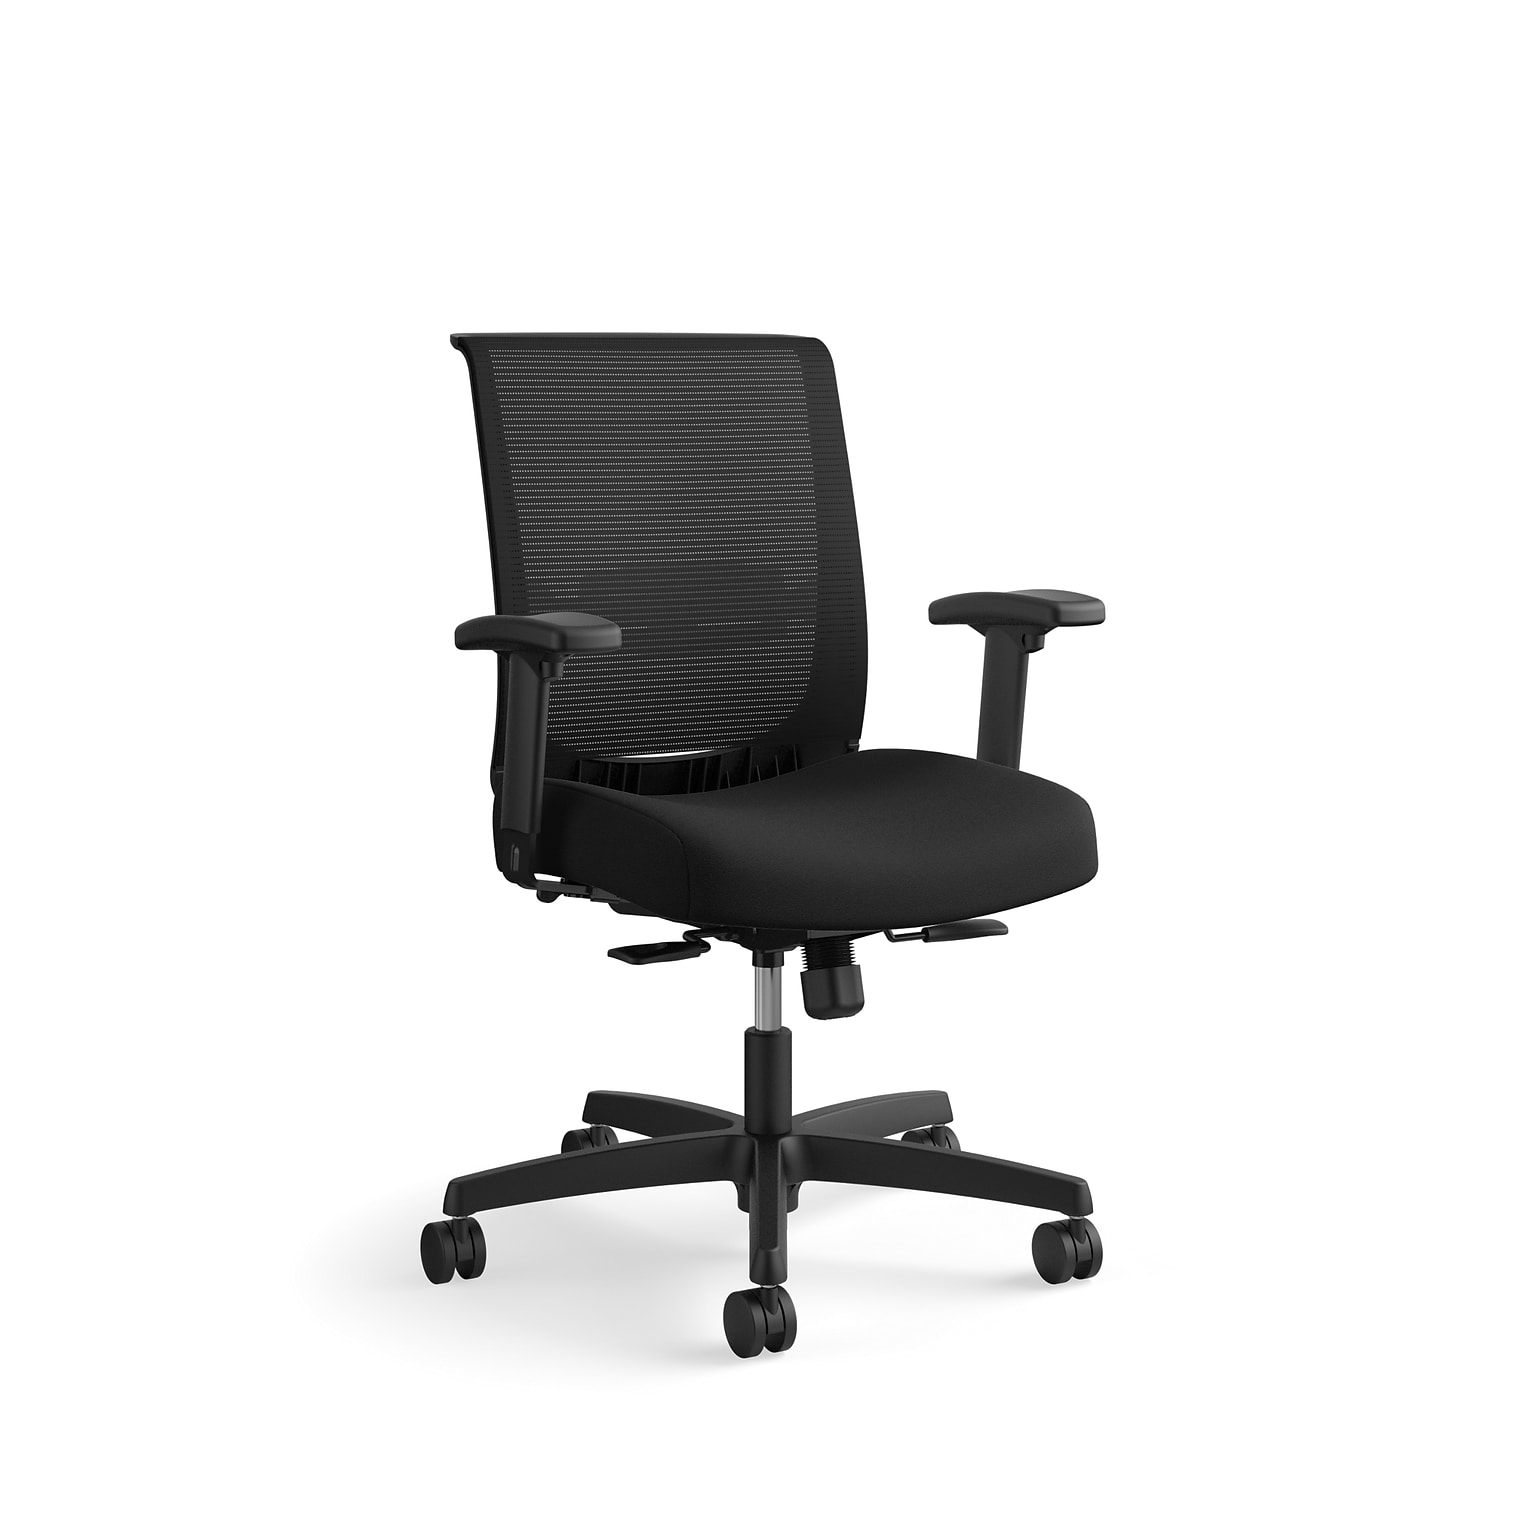 HON Convergence Fabric Task Chair, Adjustable Arms, Black (HONCMY1AACCF10N)